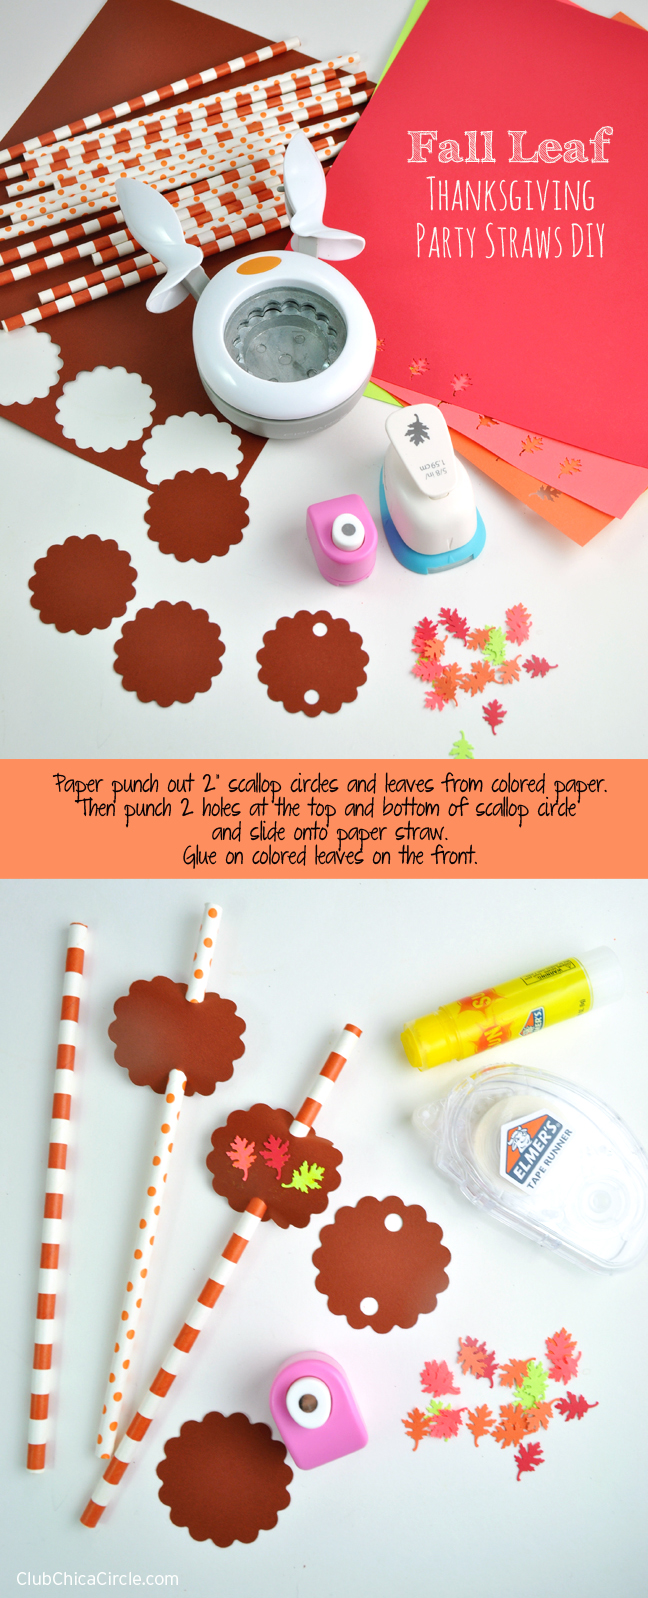 How to Make Fall Leaf Paper Party Straws for Thanksgiving